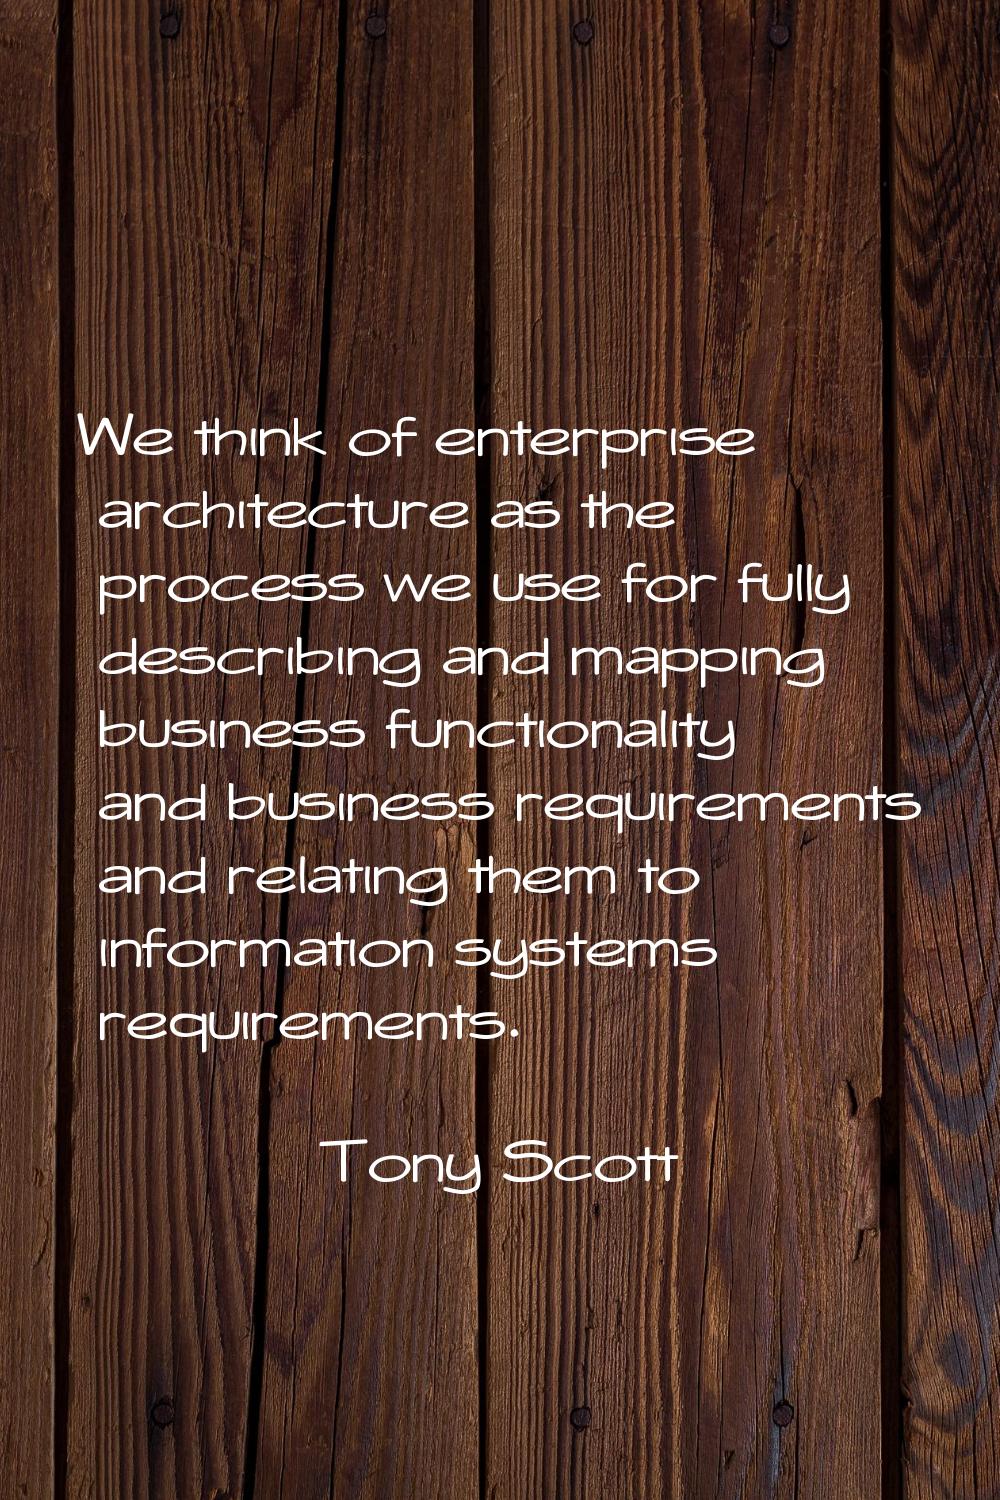 We think of enterprise architecture as the process we use for fully describing and mapping business